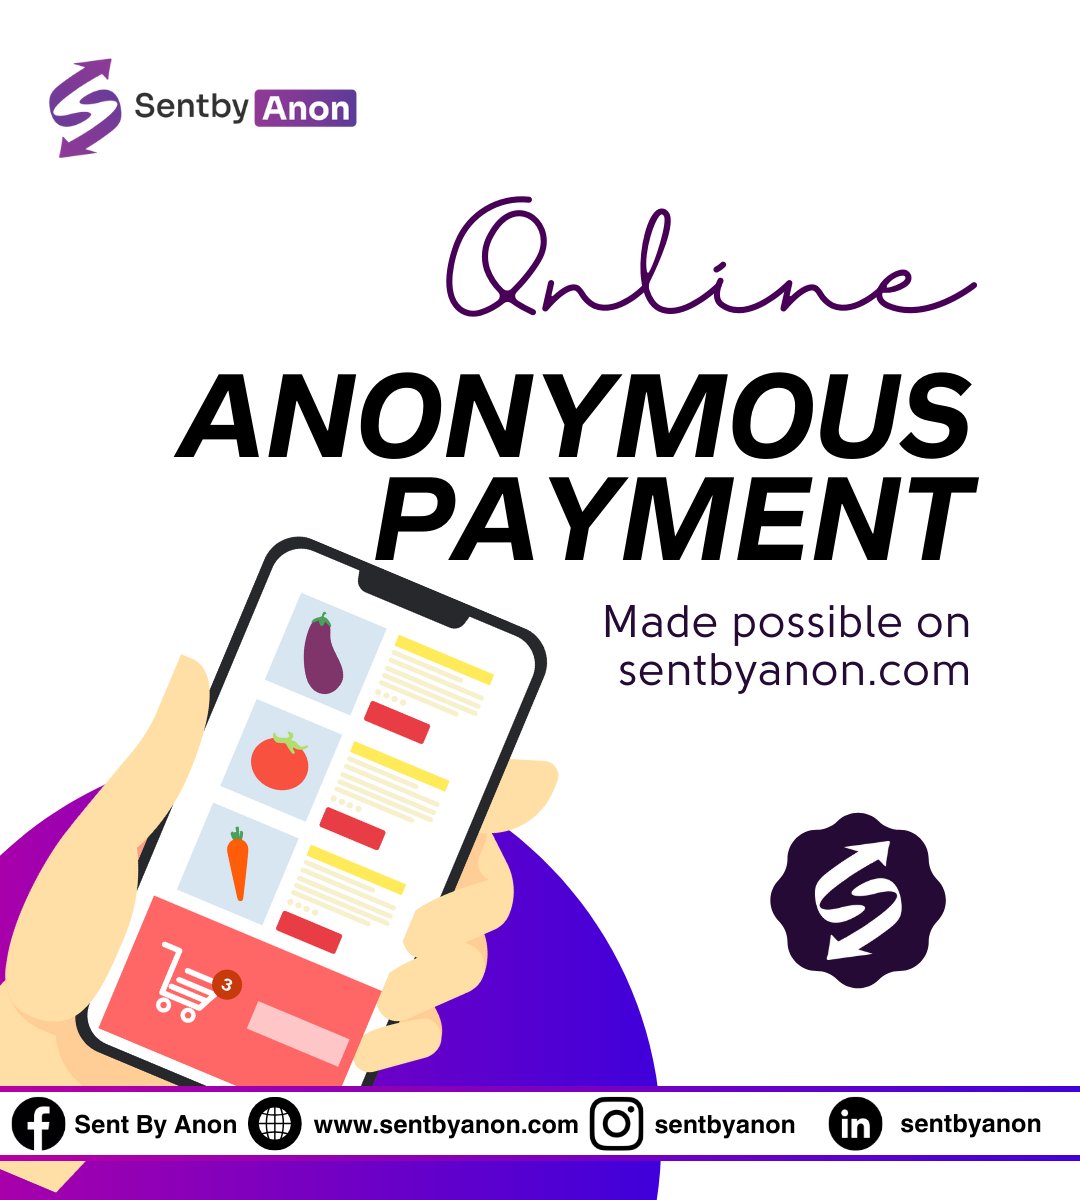 Send payments anonymously at your own convenience on sentbyanon.com

#paymentprocessing #merchantservices #paymentsolutions #creditcardprocessing #business #payments #smallbusiness #pos #pointofsale #possystem #ecommerce #paymentgateway #mobilepayments #creditcard